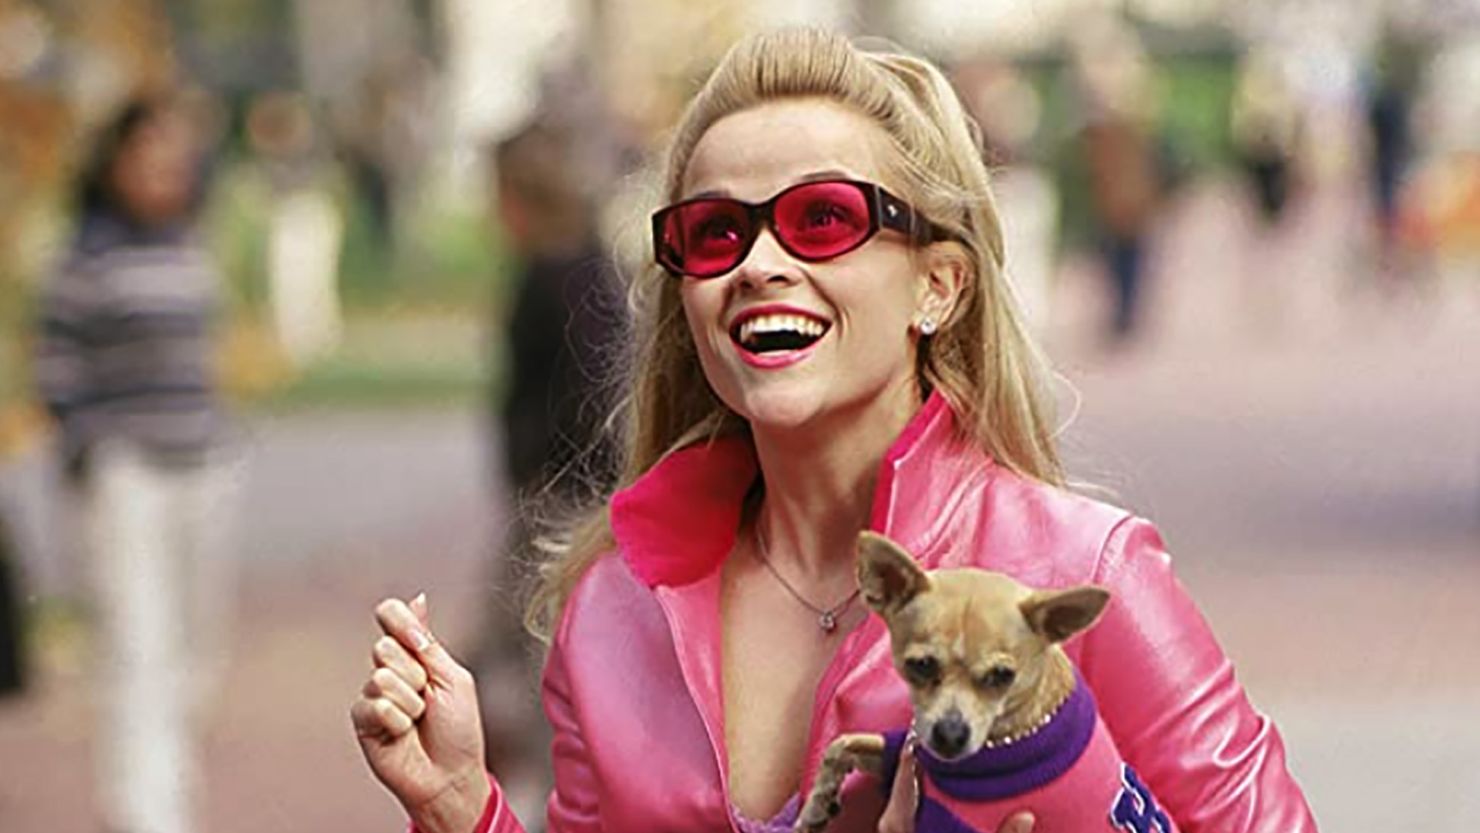 Reese Witherspoon will return to her role as Elle Woods in "Legally Blonde 3."